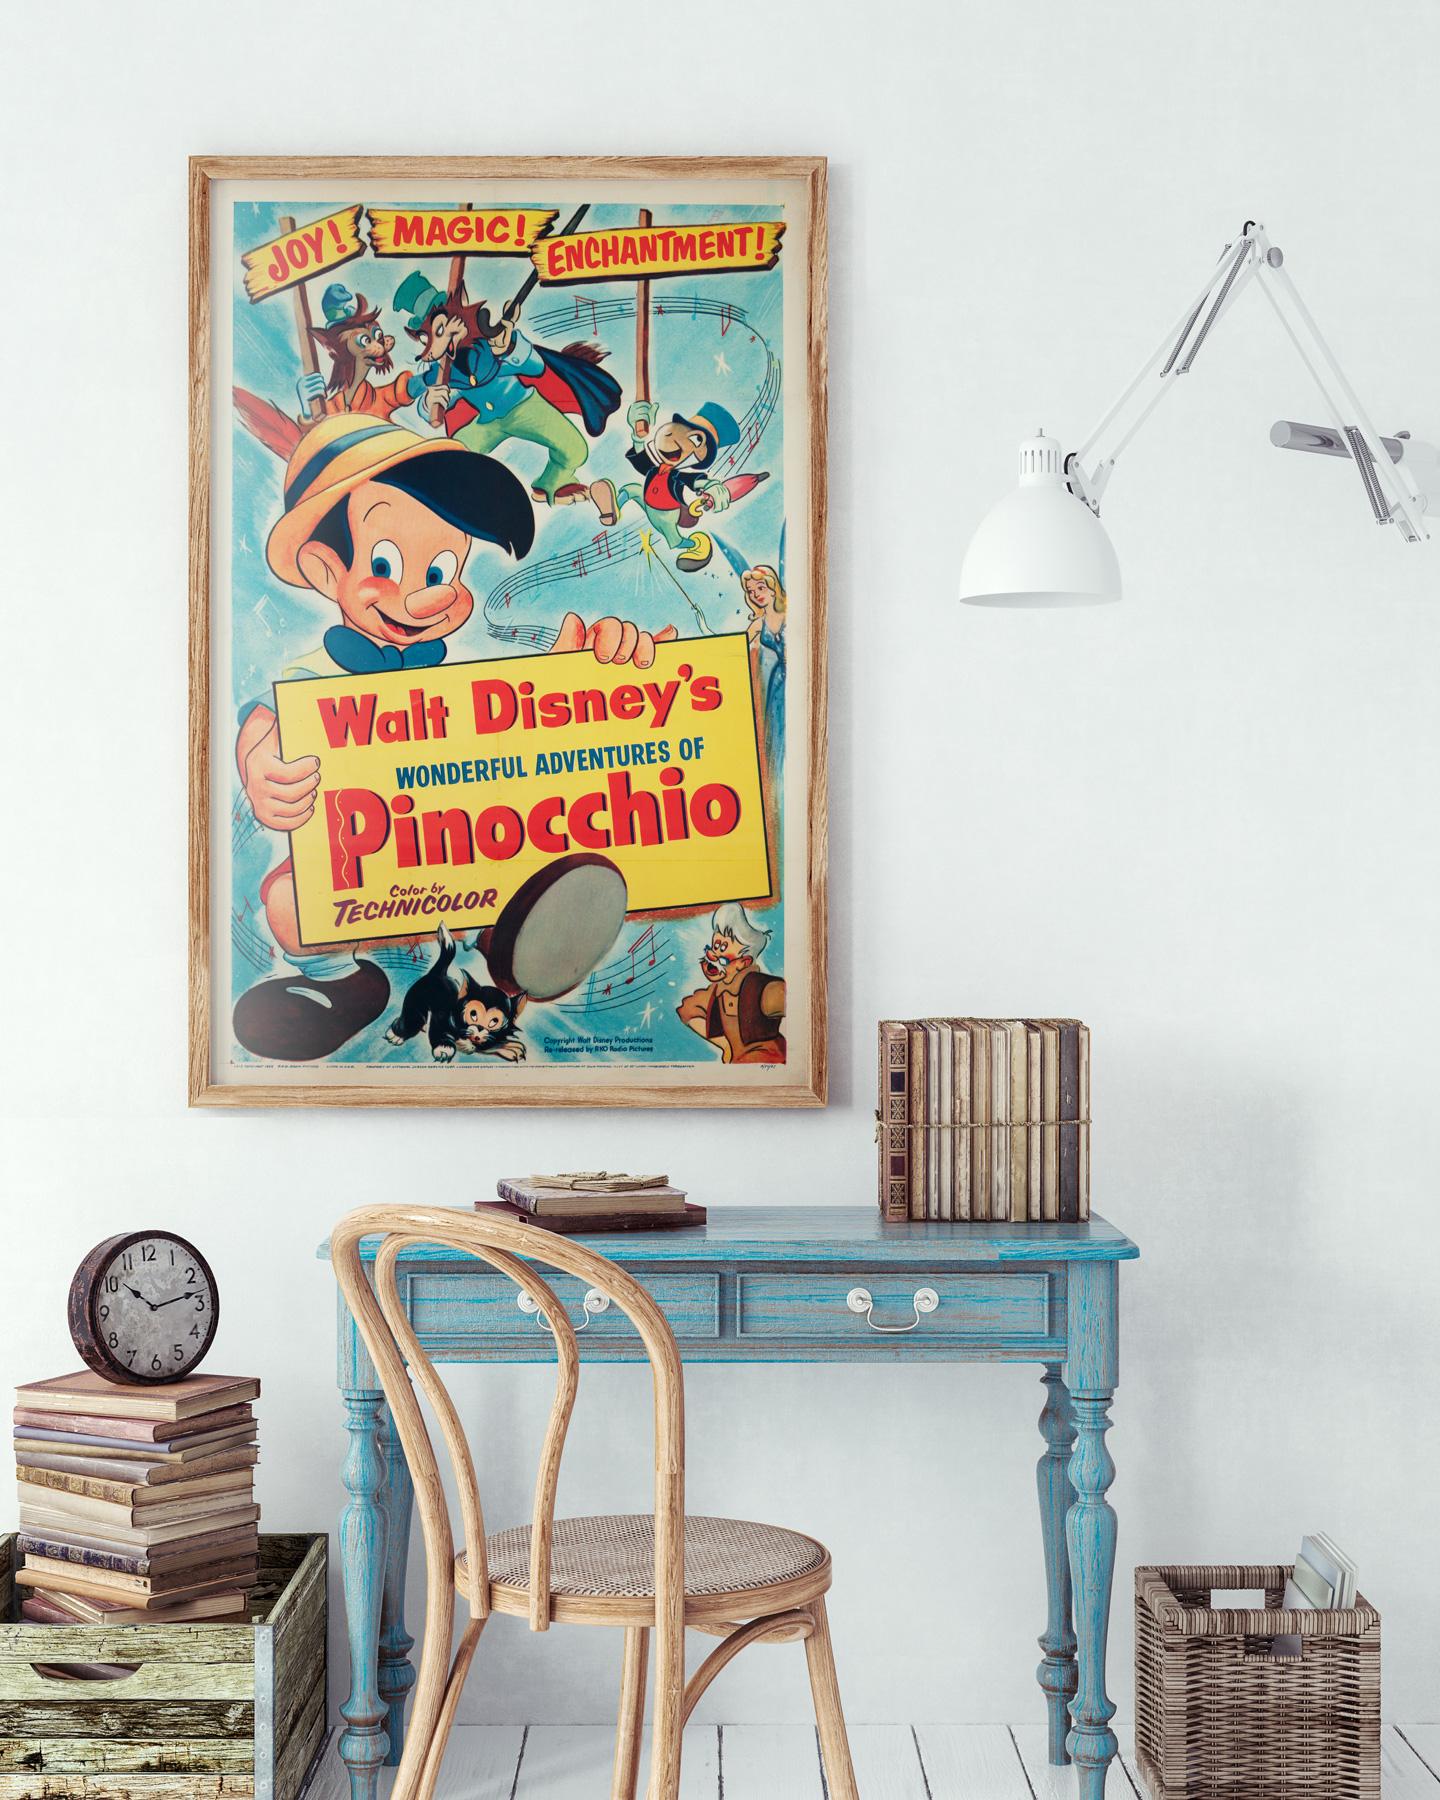 Pinocchio R1954 US 1 sheet film movie poster

The fabulous and rare early 1950s re-release US film poster for Disney's Pinocchio. Wonderful poster!

This original vintage movie poster has been professionally cleaned, deacidified and linen-backed